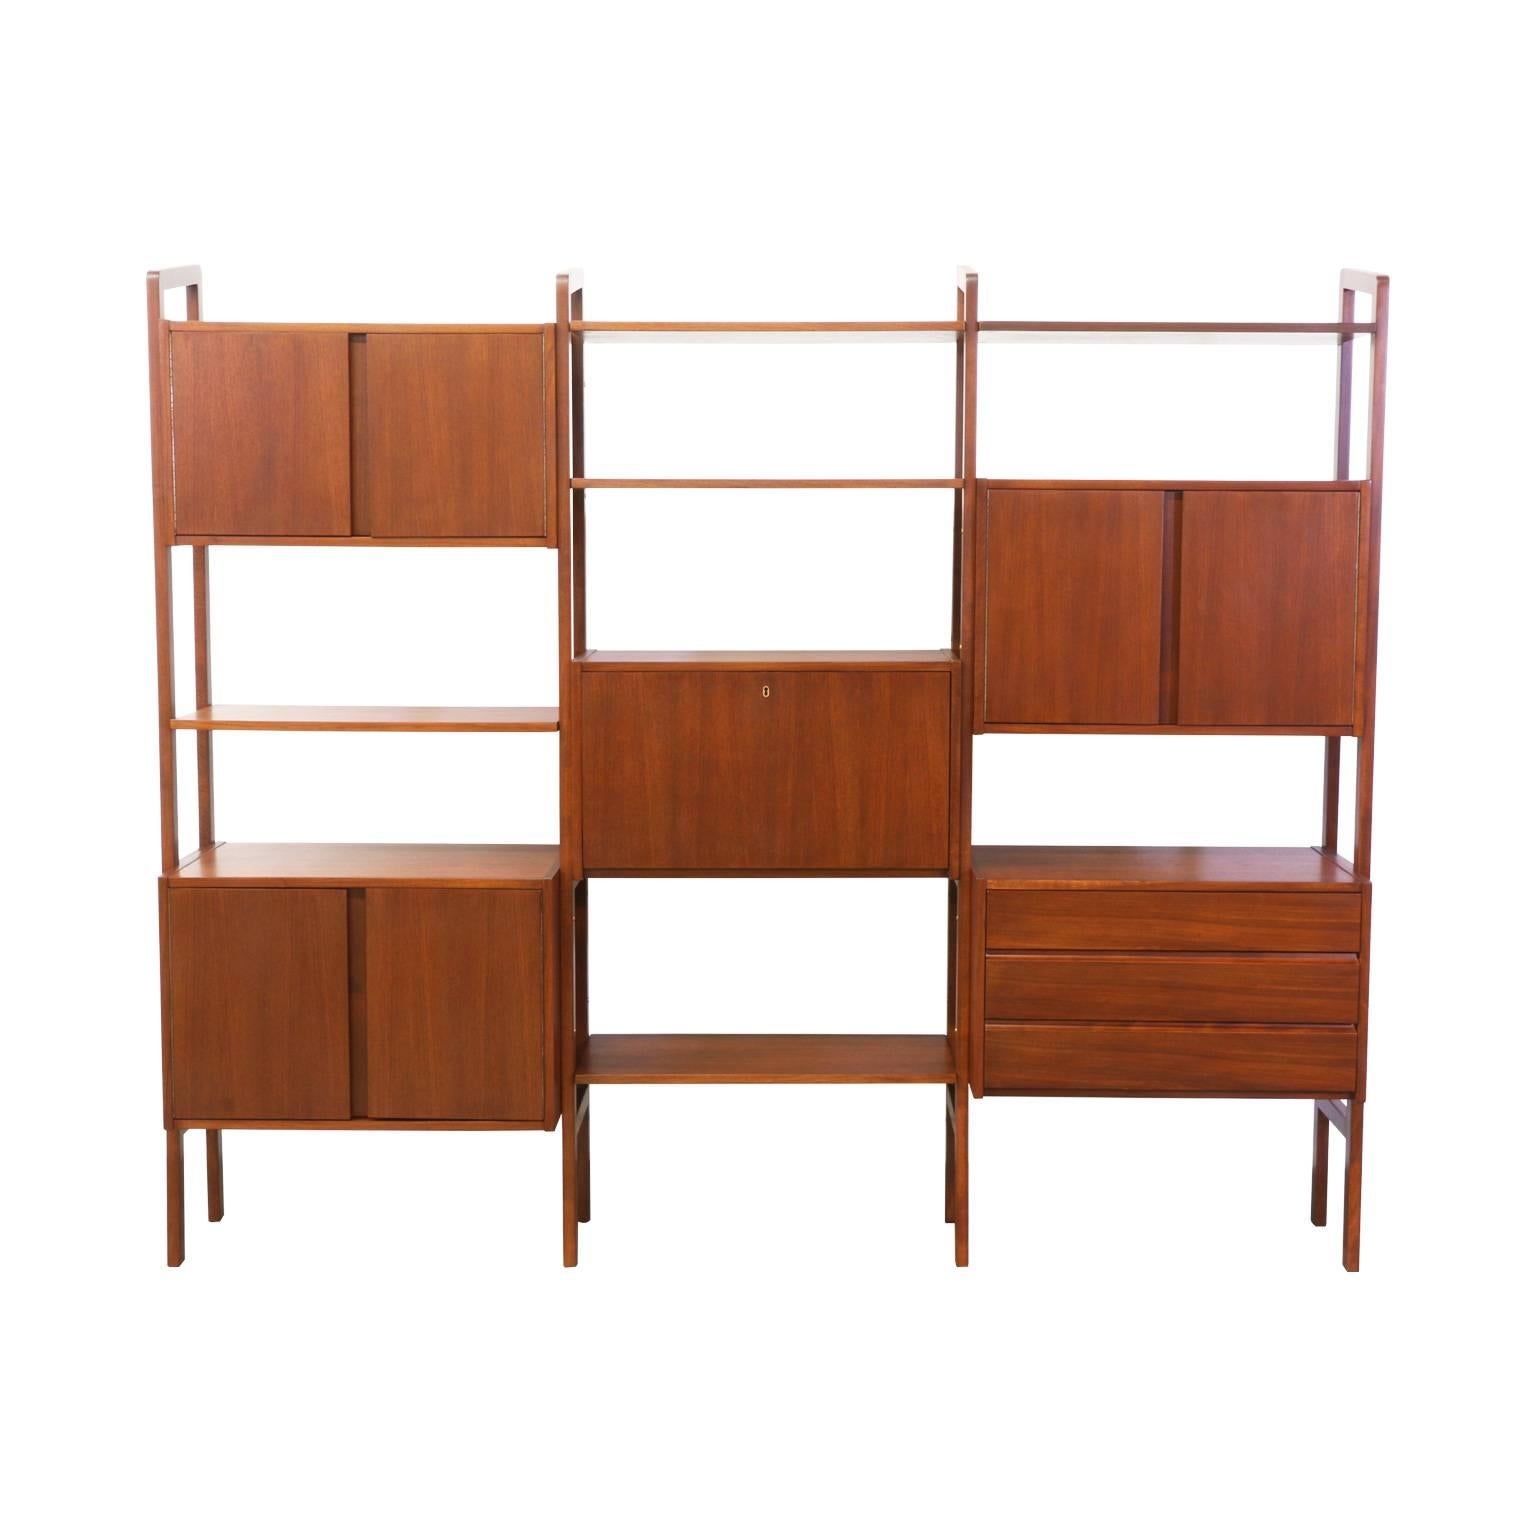 Designer: Unknown
Manufacturer: Unknown
Period/Style: Mid Century Modern
Country: United States
Date: 1950’s

Dimensions: 71″H x 86.5″L x 16.5″W
Materials: Walnut
Condition: Excellent – Newly Refinished
Number of Items: 1
ID Number: 1559